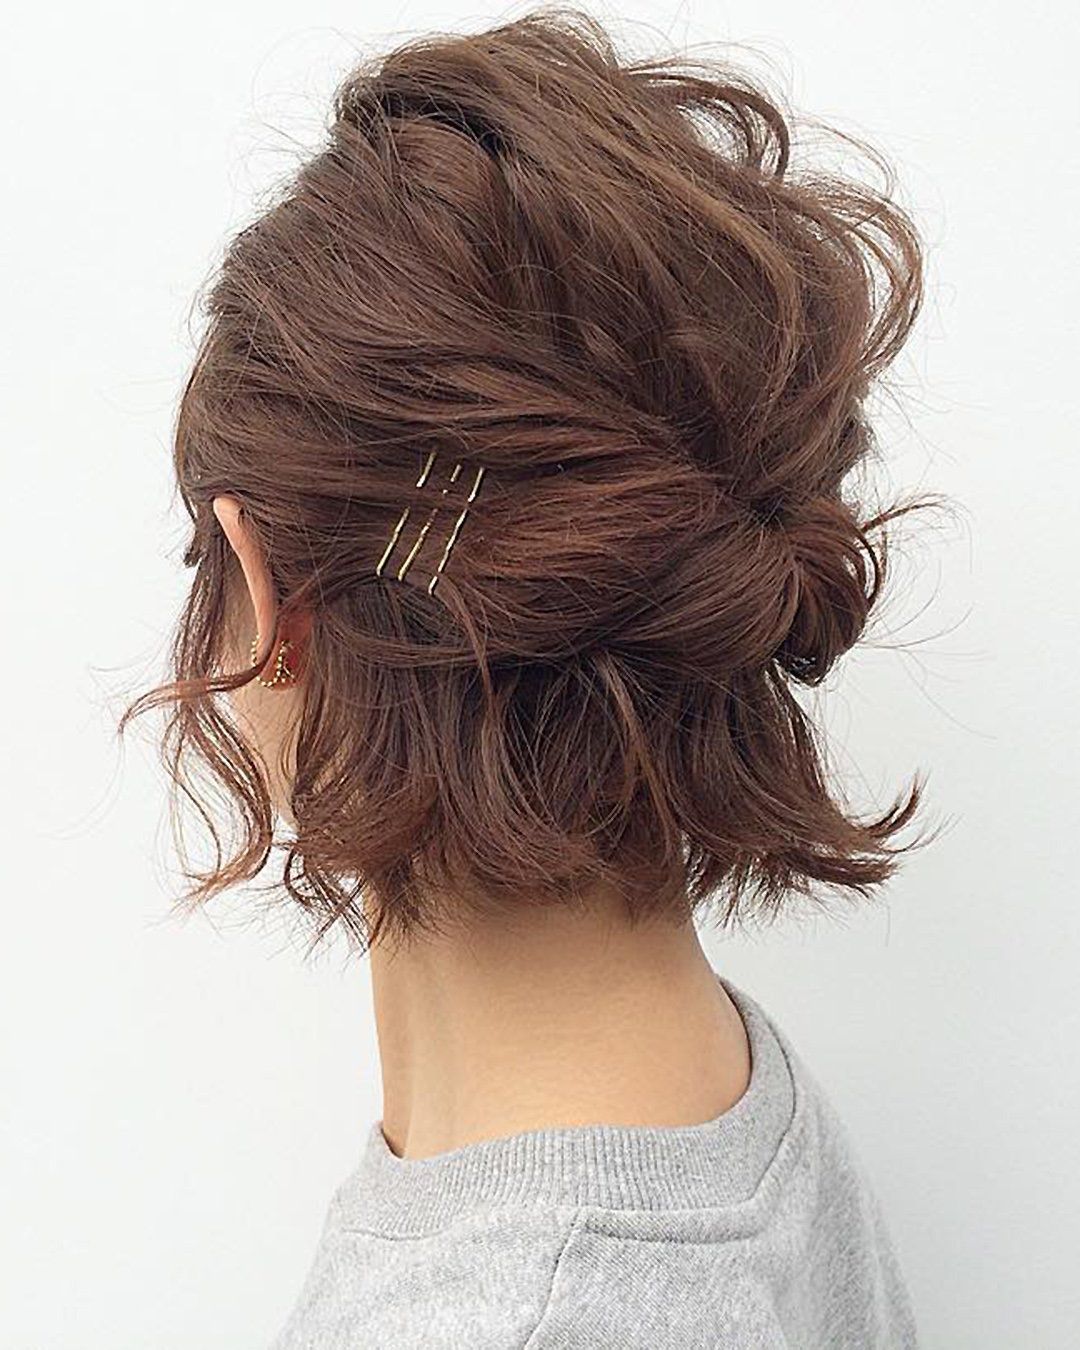 Stunning Updos for Short Hair: Stylish and Sophisticated Looks